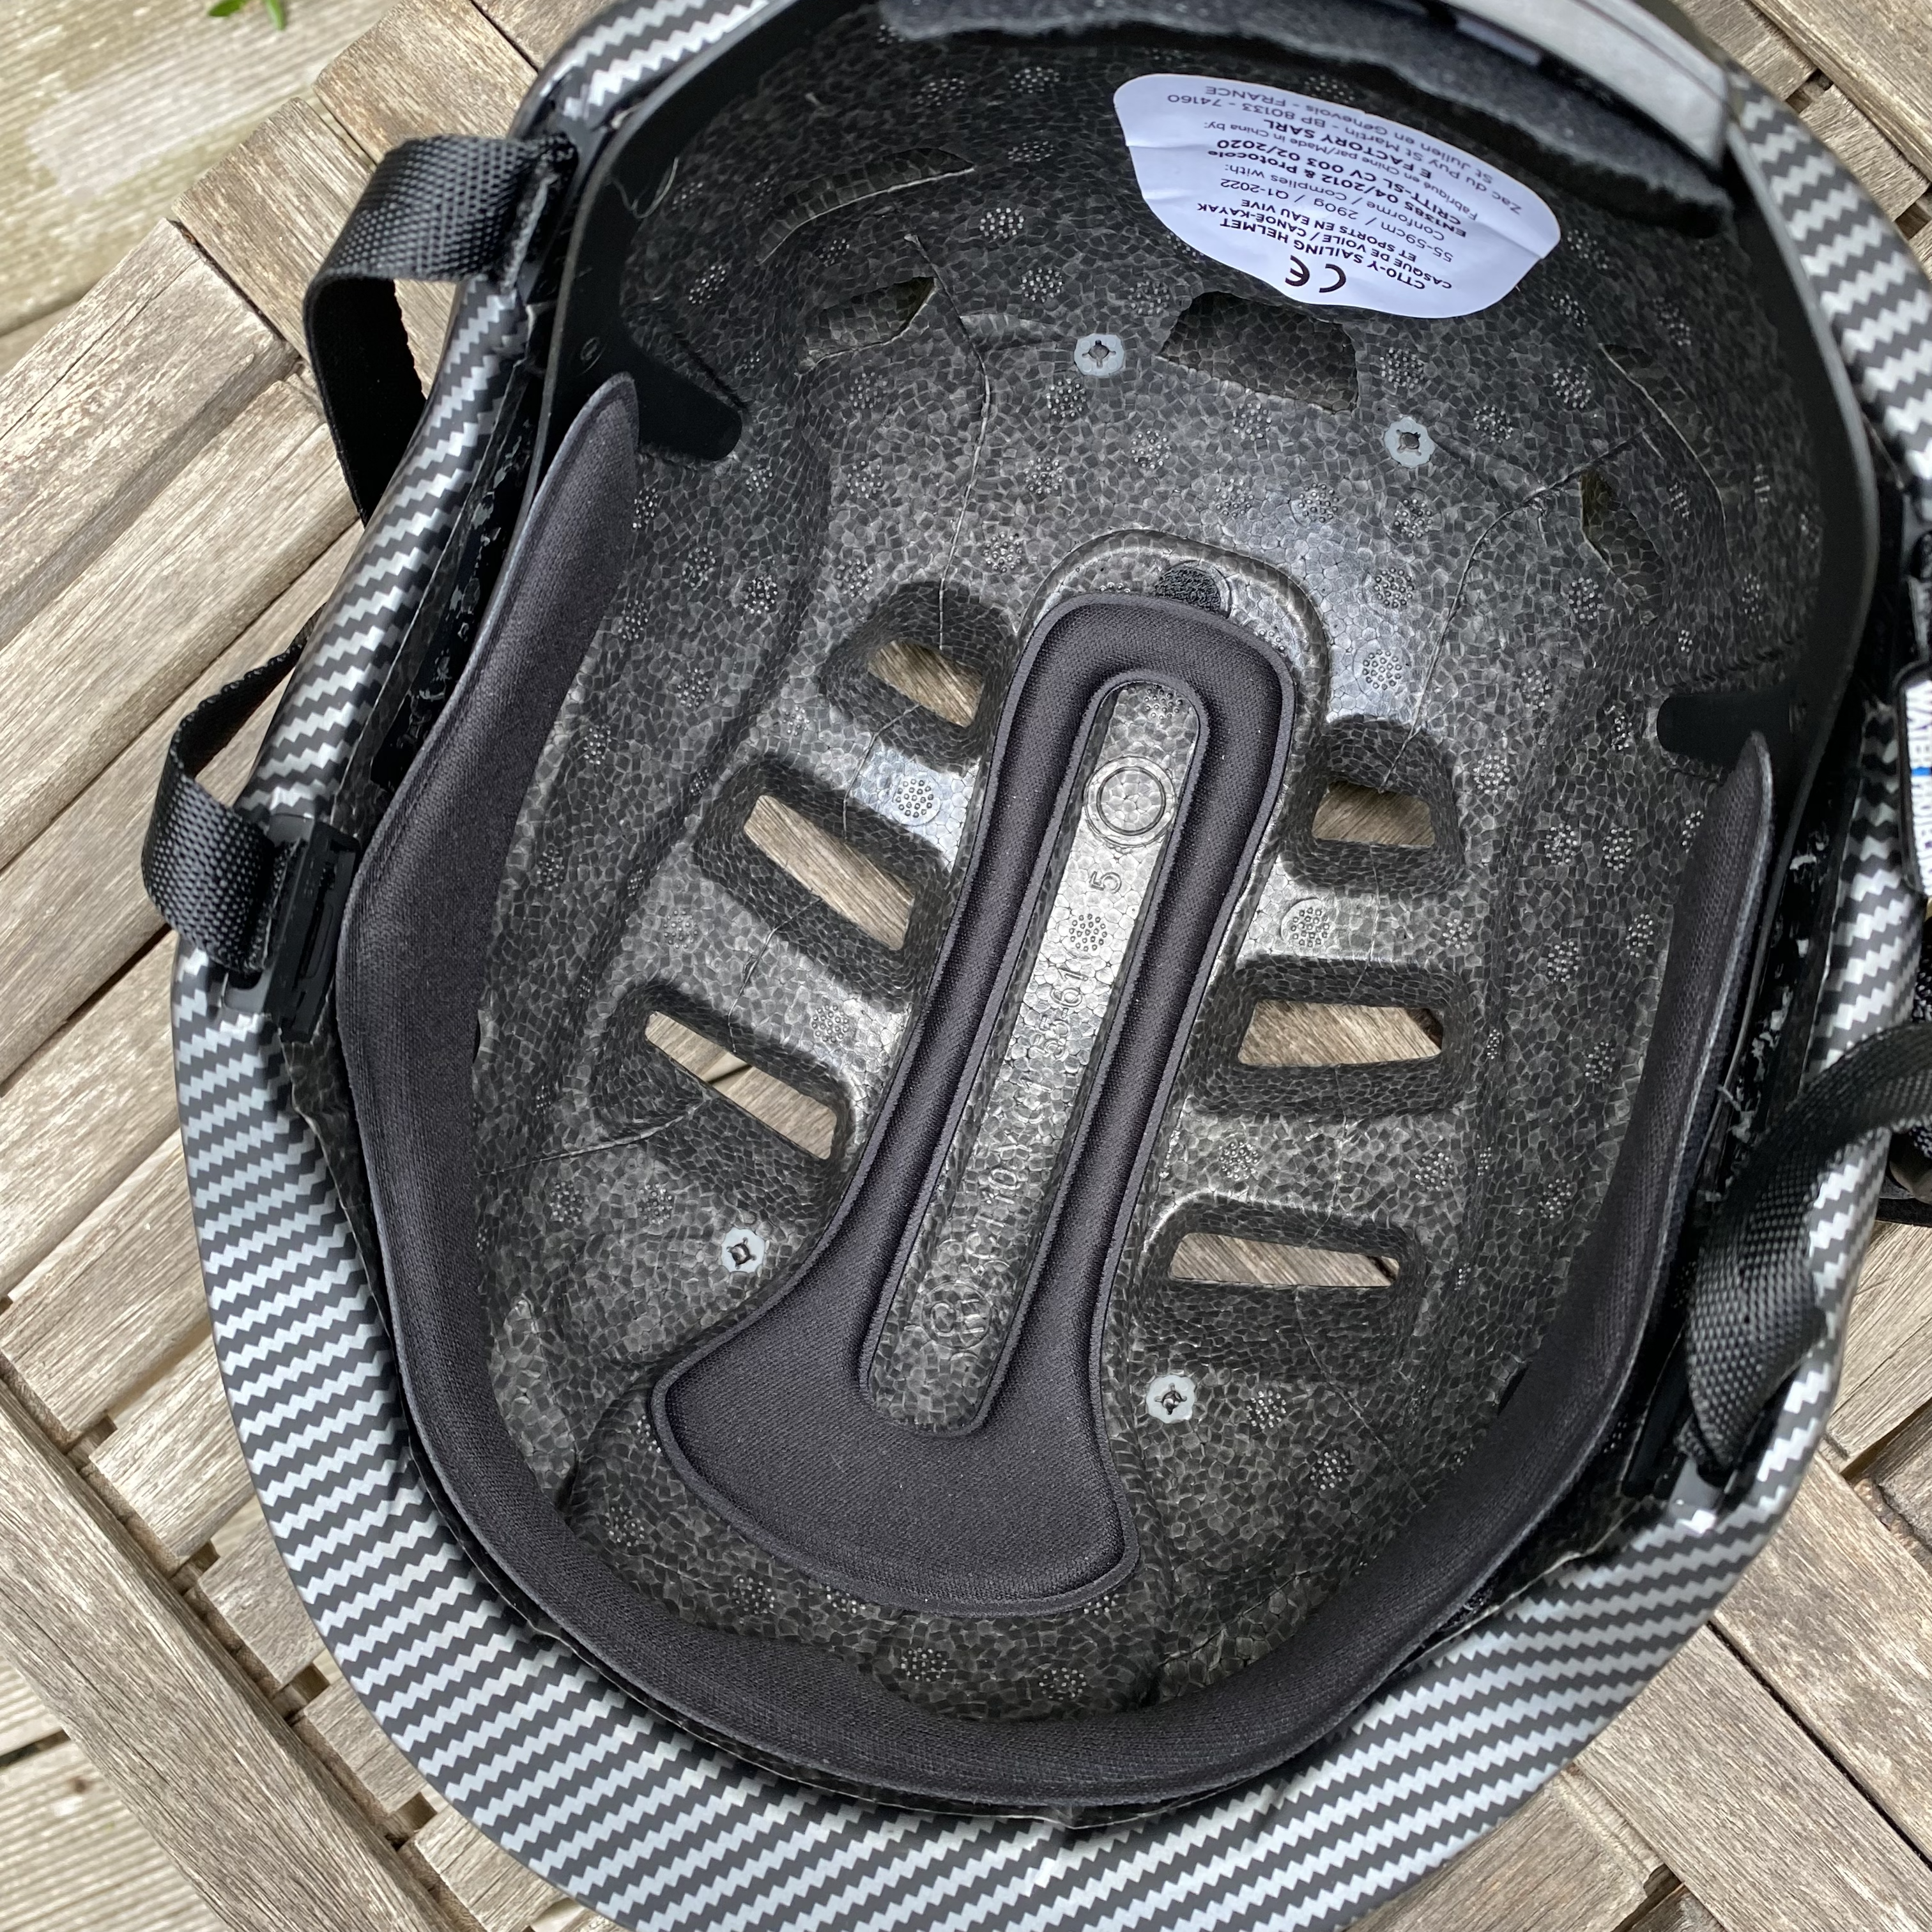 Ensis Double Shell Helm Test